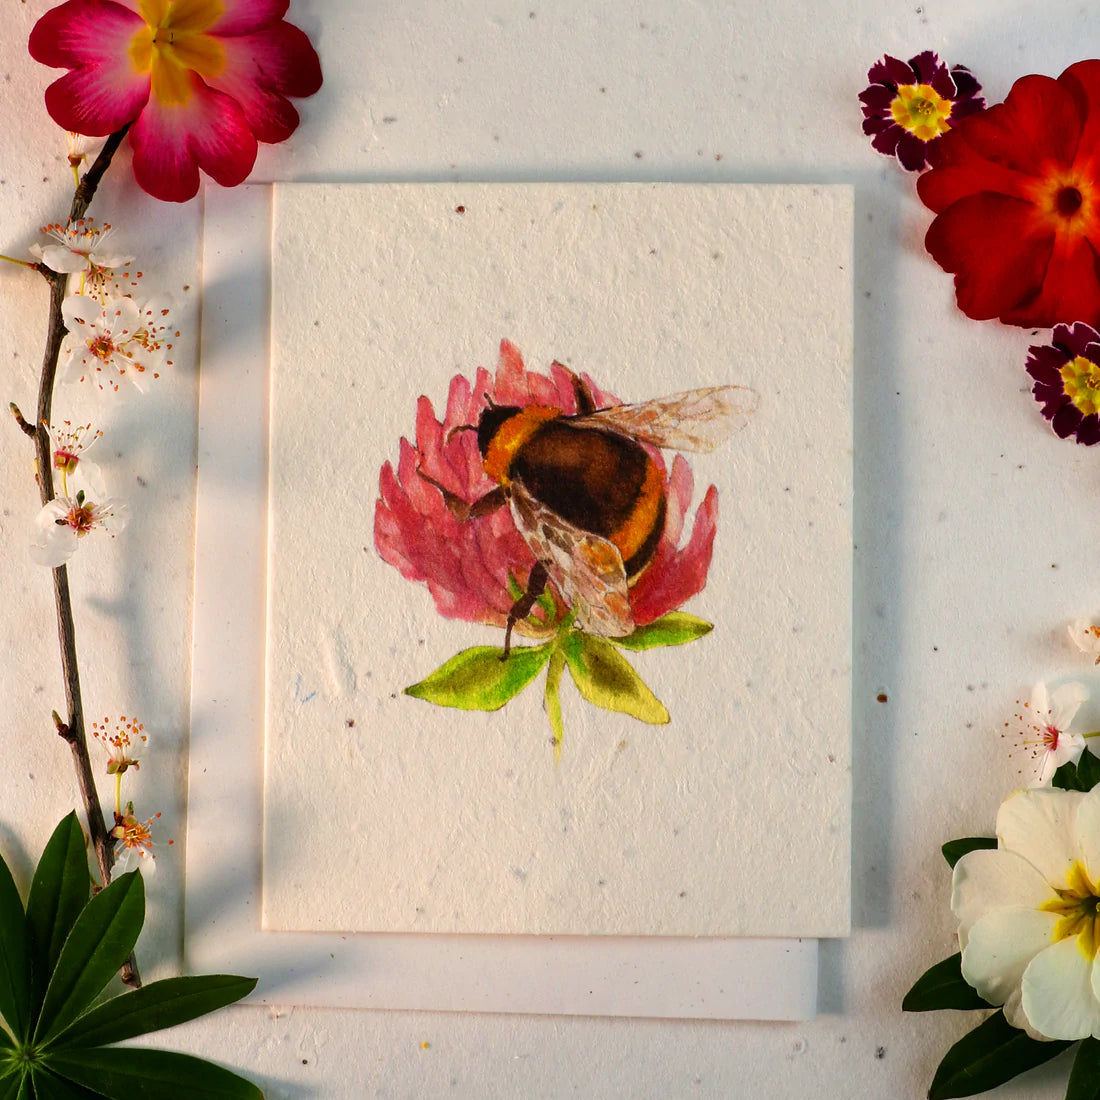 Seeded Cards That Grow Into Flowers (Bumblebee)